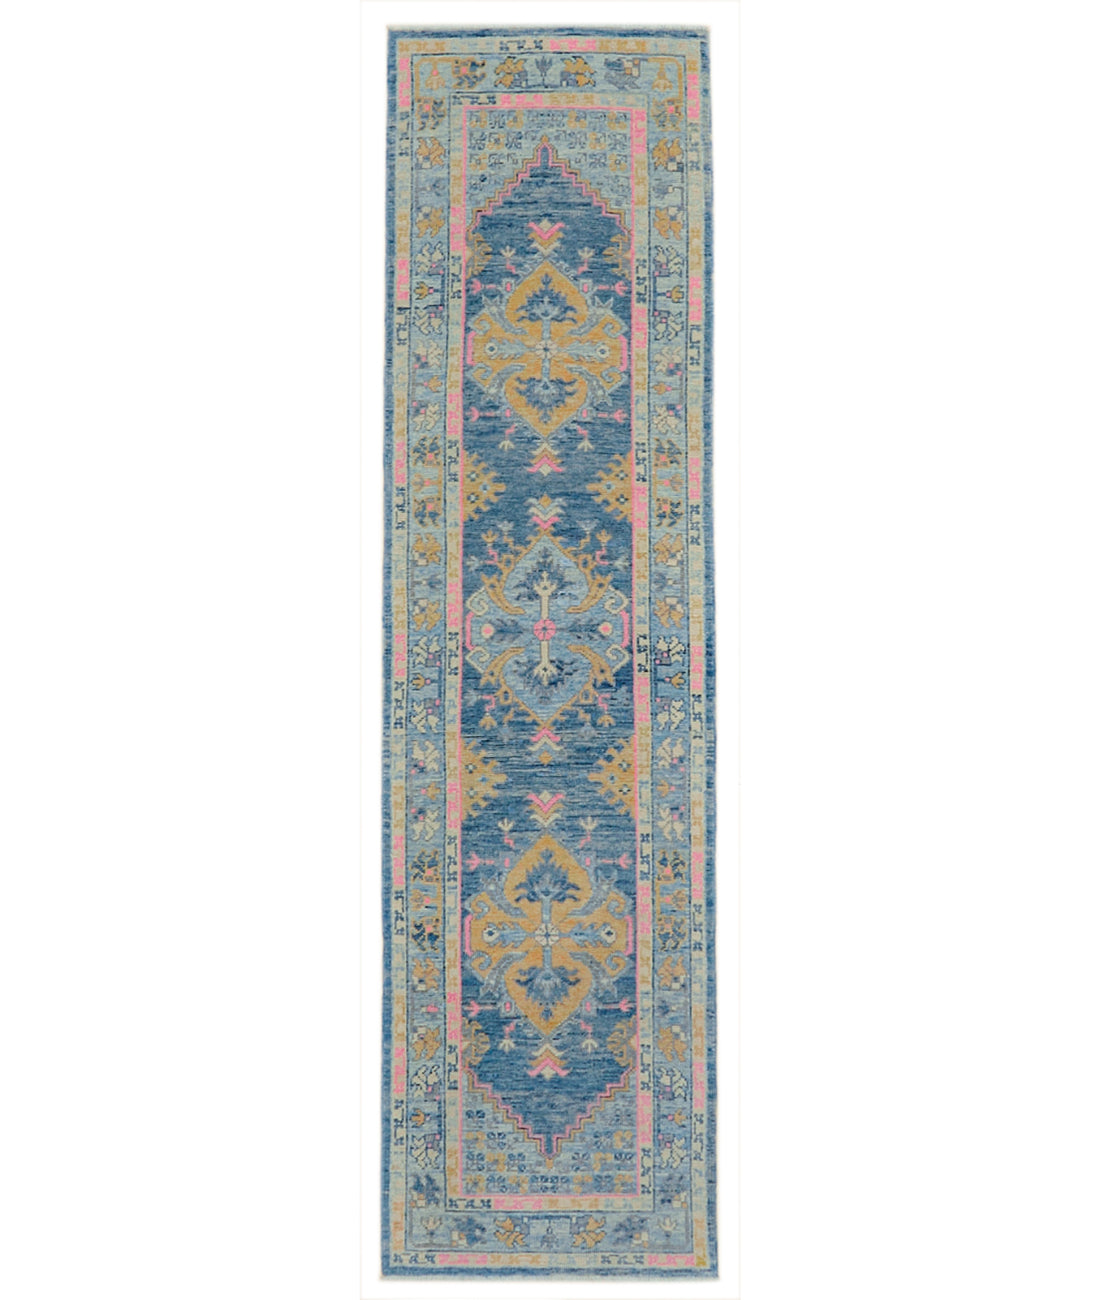 Hand Knotted Turkey Oushak Wool Rug 2&#39;11&quot; x 11&#39;3&quot; 2&#39; 11&quot; X 11&#39; 3&quot; (89 X 343) / Blue / Grey